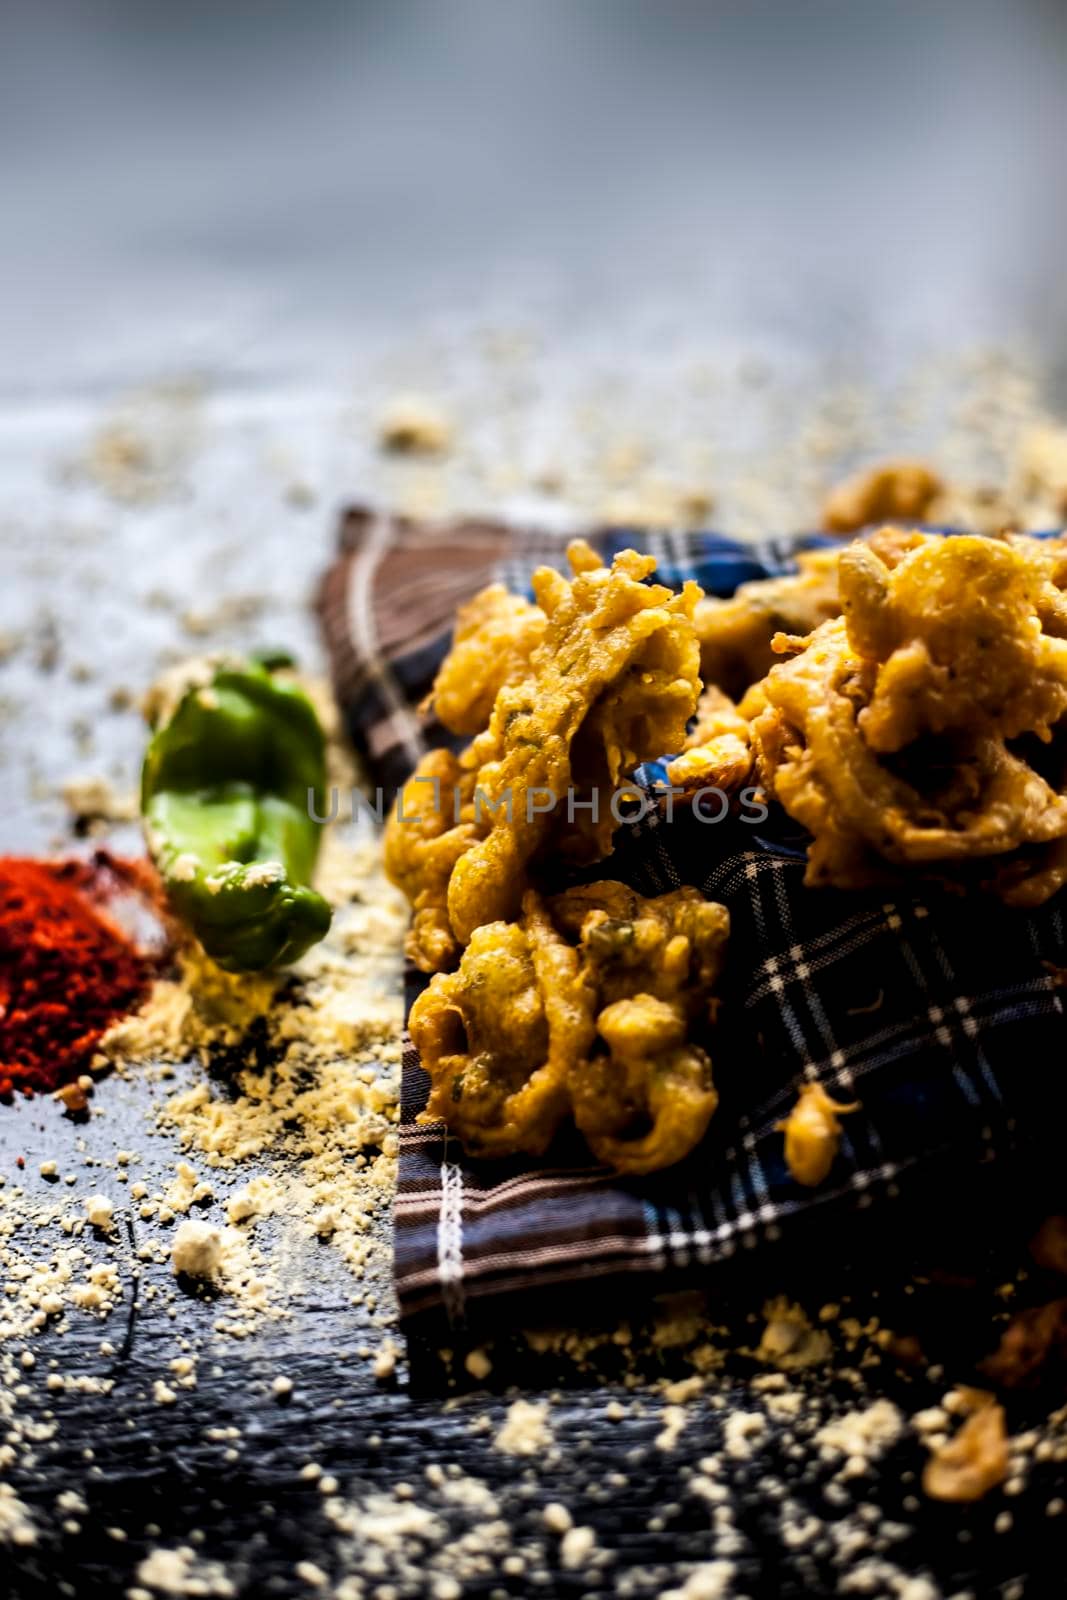 Famous kanda bhaji or kanda bhajiya or kanda pakora in a container on a black surface along with chickpea flour, spices, and all other ingredients for making it.